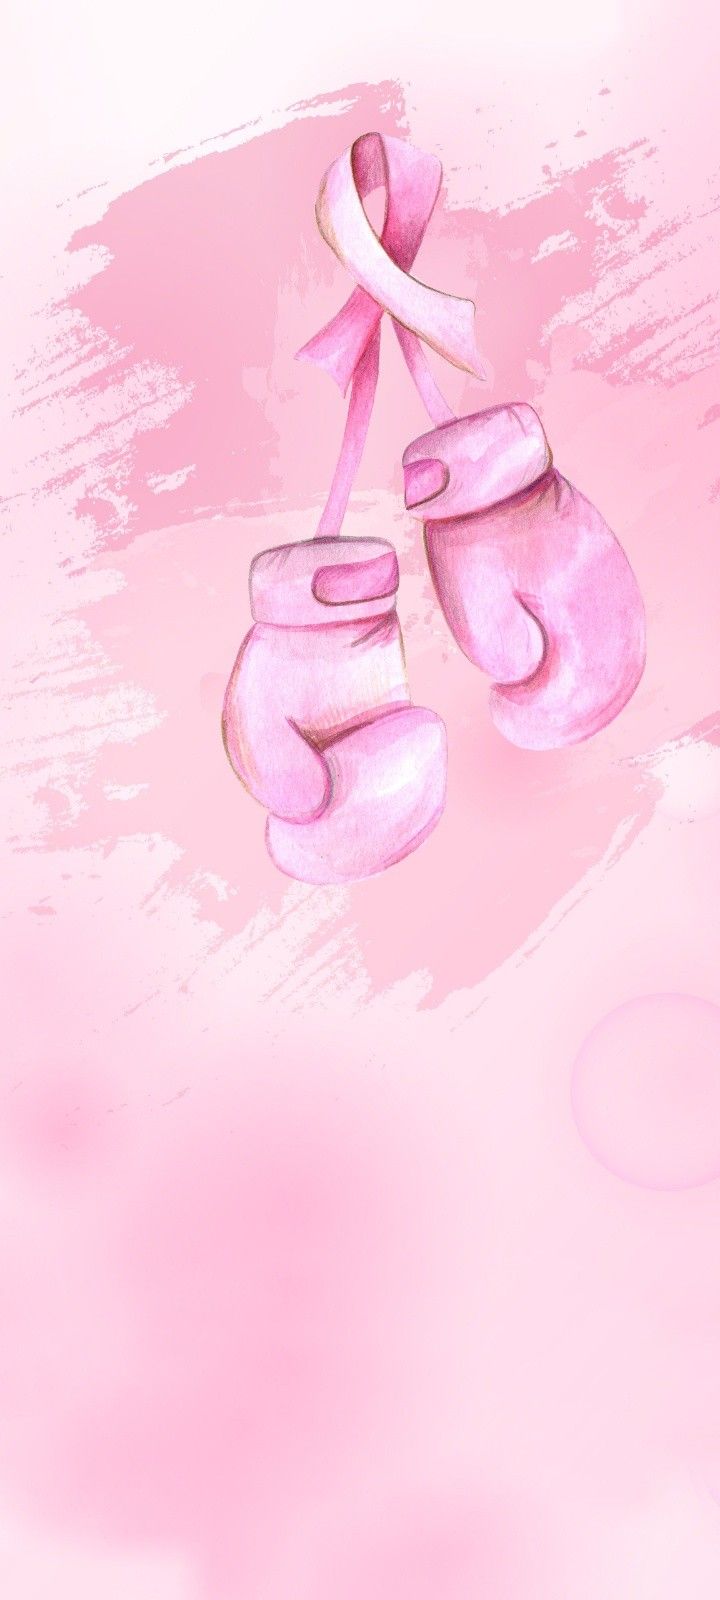 Pink boxing gloves hanging from a pink ribbon - Cancer